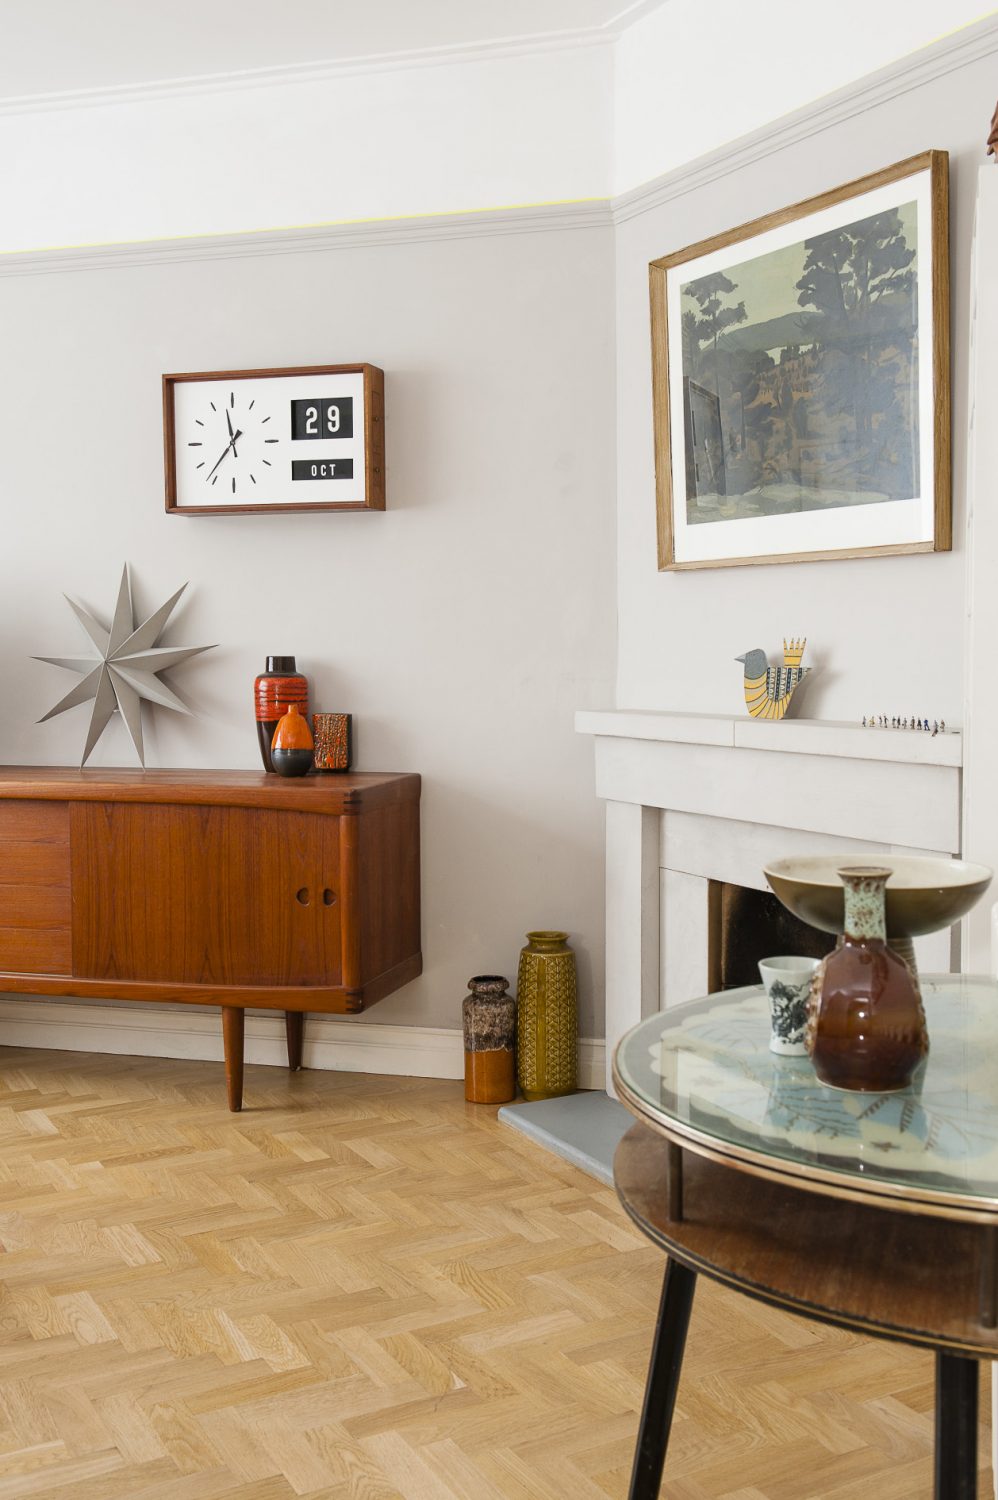 Above a spectacular mid-60s sideboard hangs a 60s bank clock showing both time and date